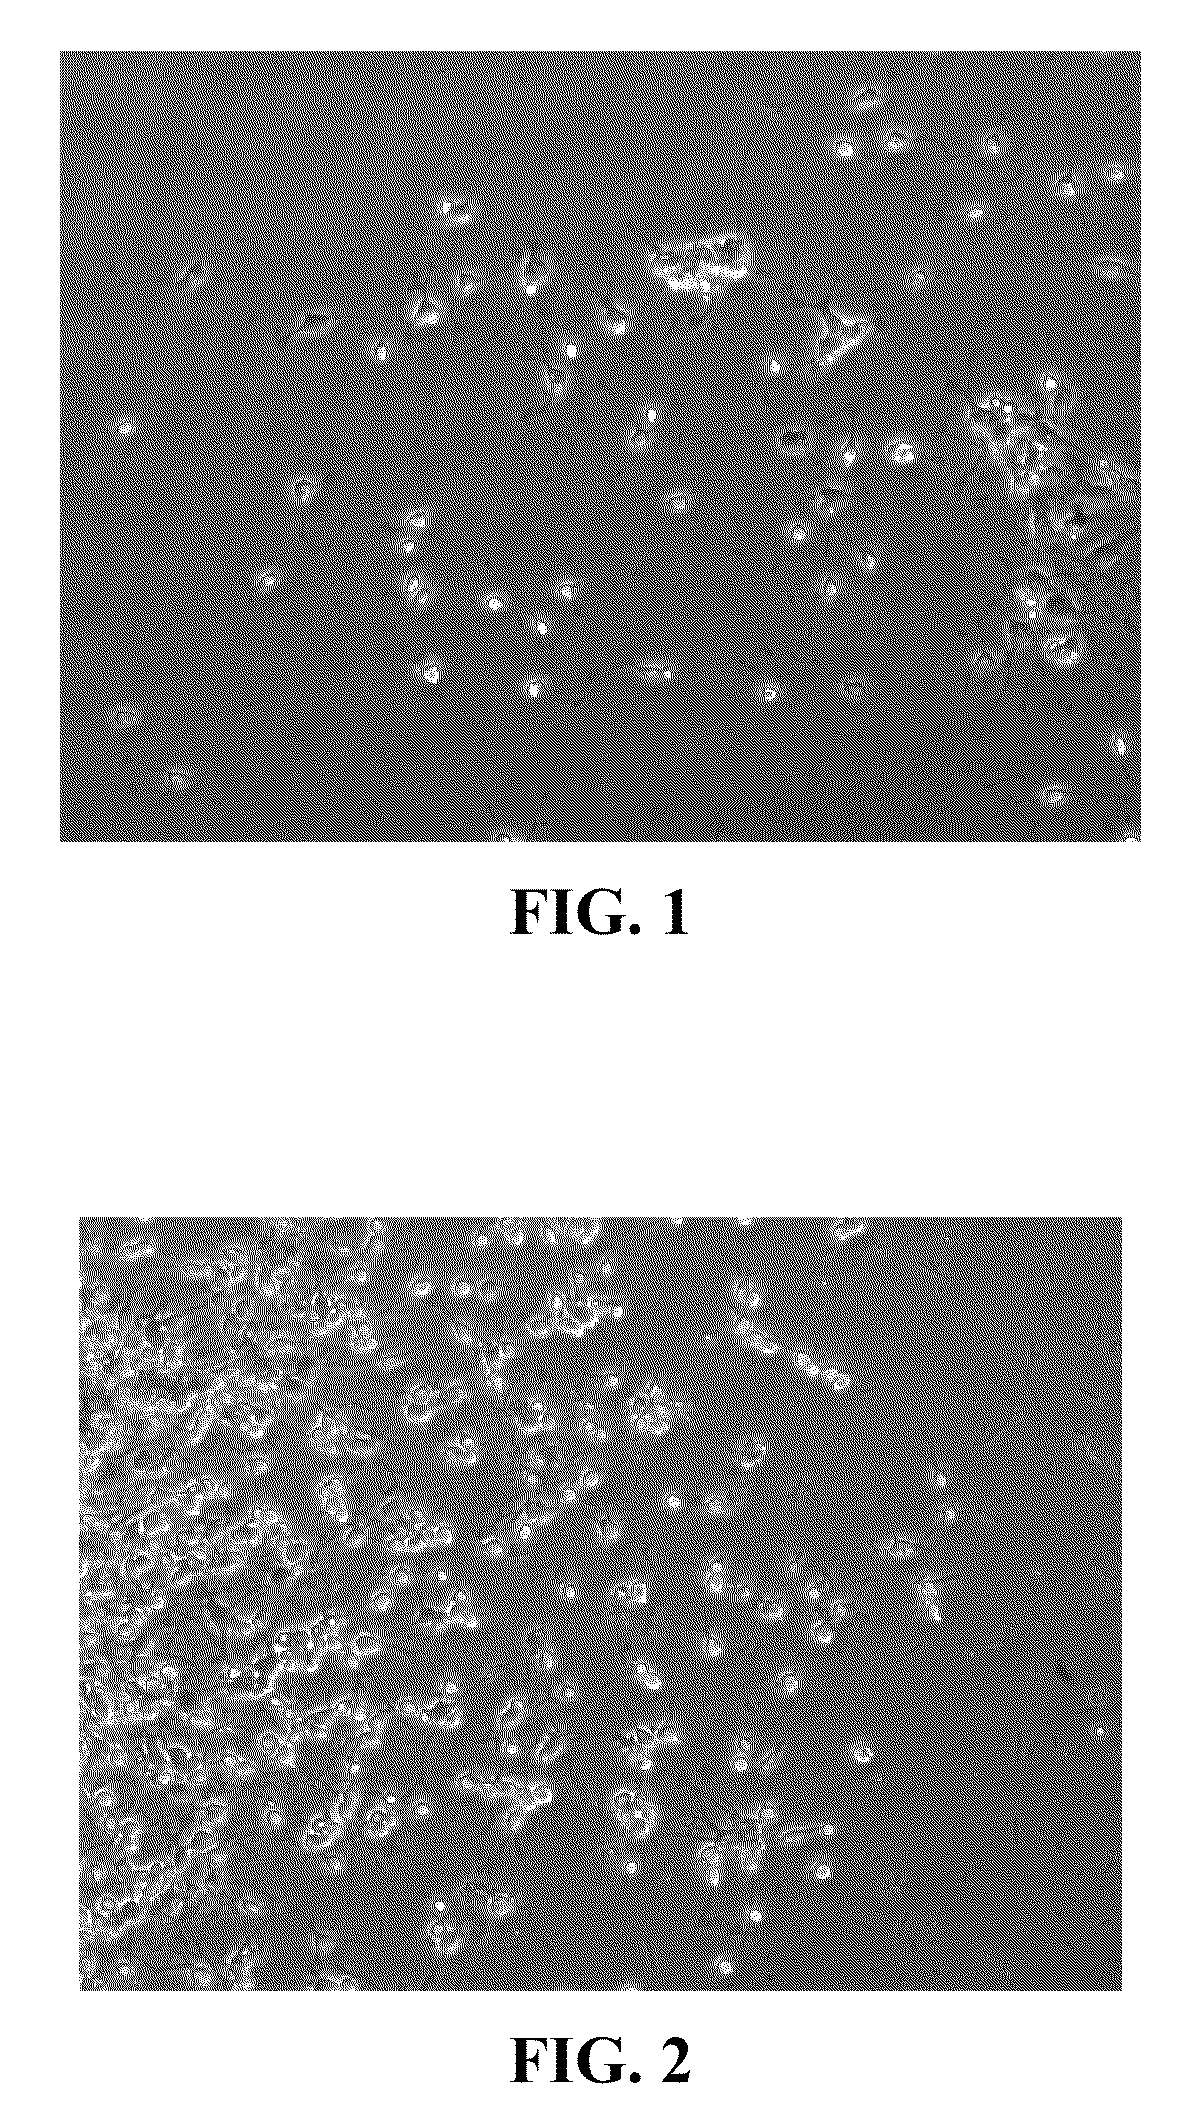 Methods for directing differentiation of clonogenic neural stem cells with coumarins